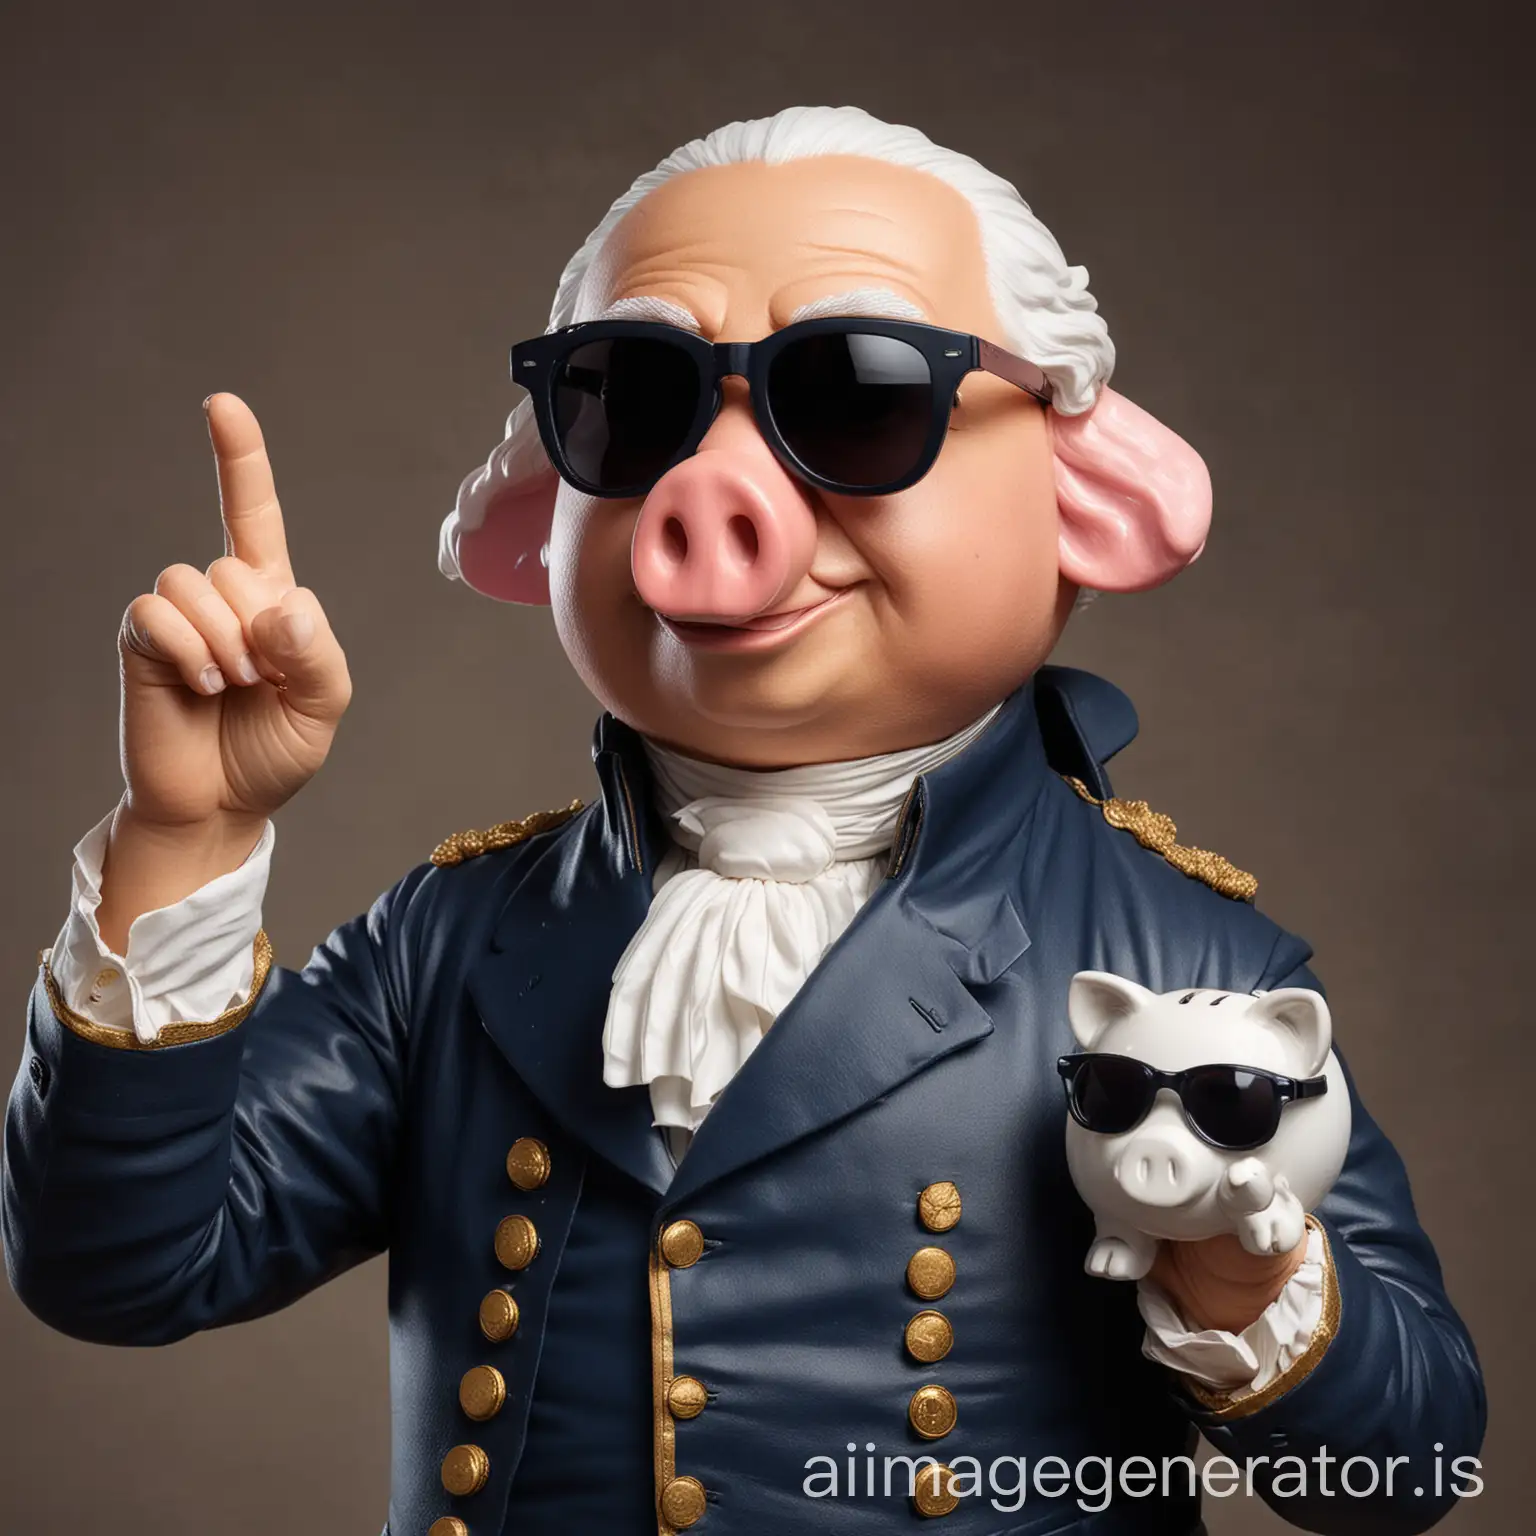 George-Washington-with-Shades-and-Headphones-Holding-a-Piggy-Bank-and-Pointing